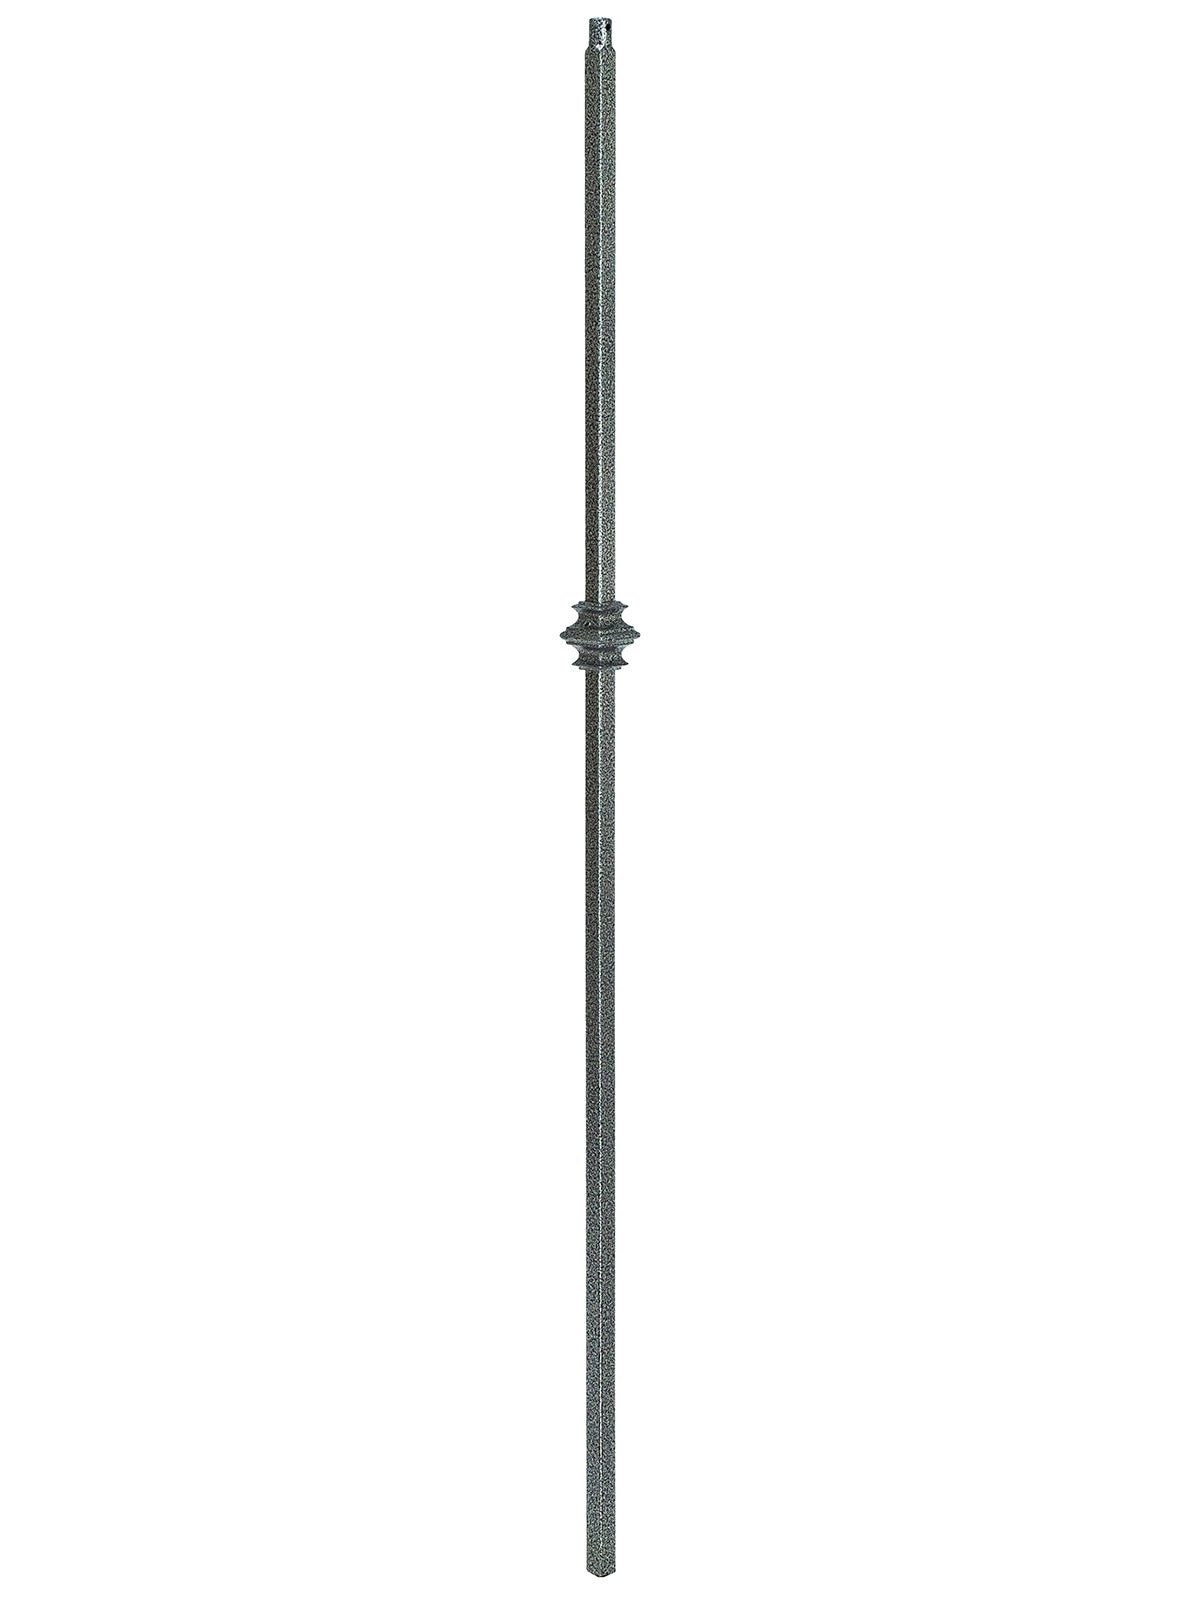 Iron Baluster 2G60 - 5/8" Square - Single Knuckle